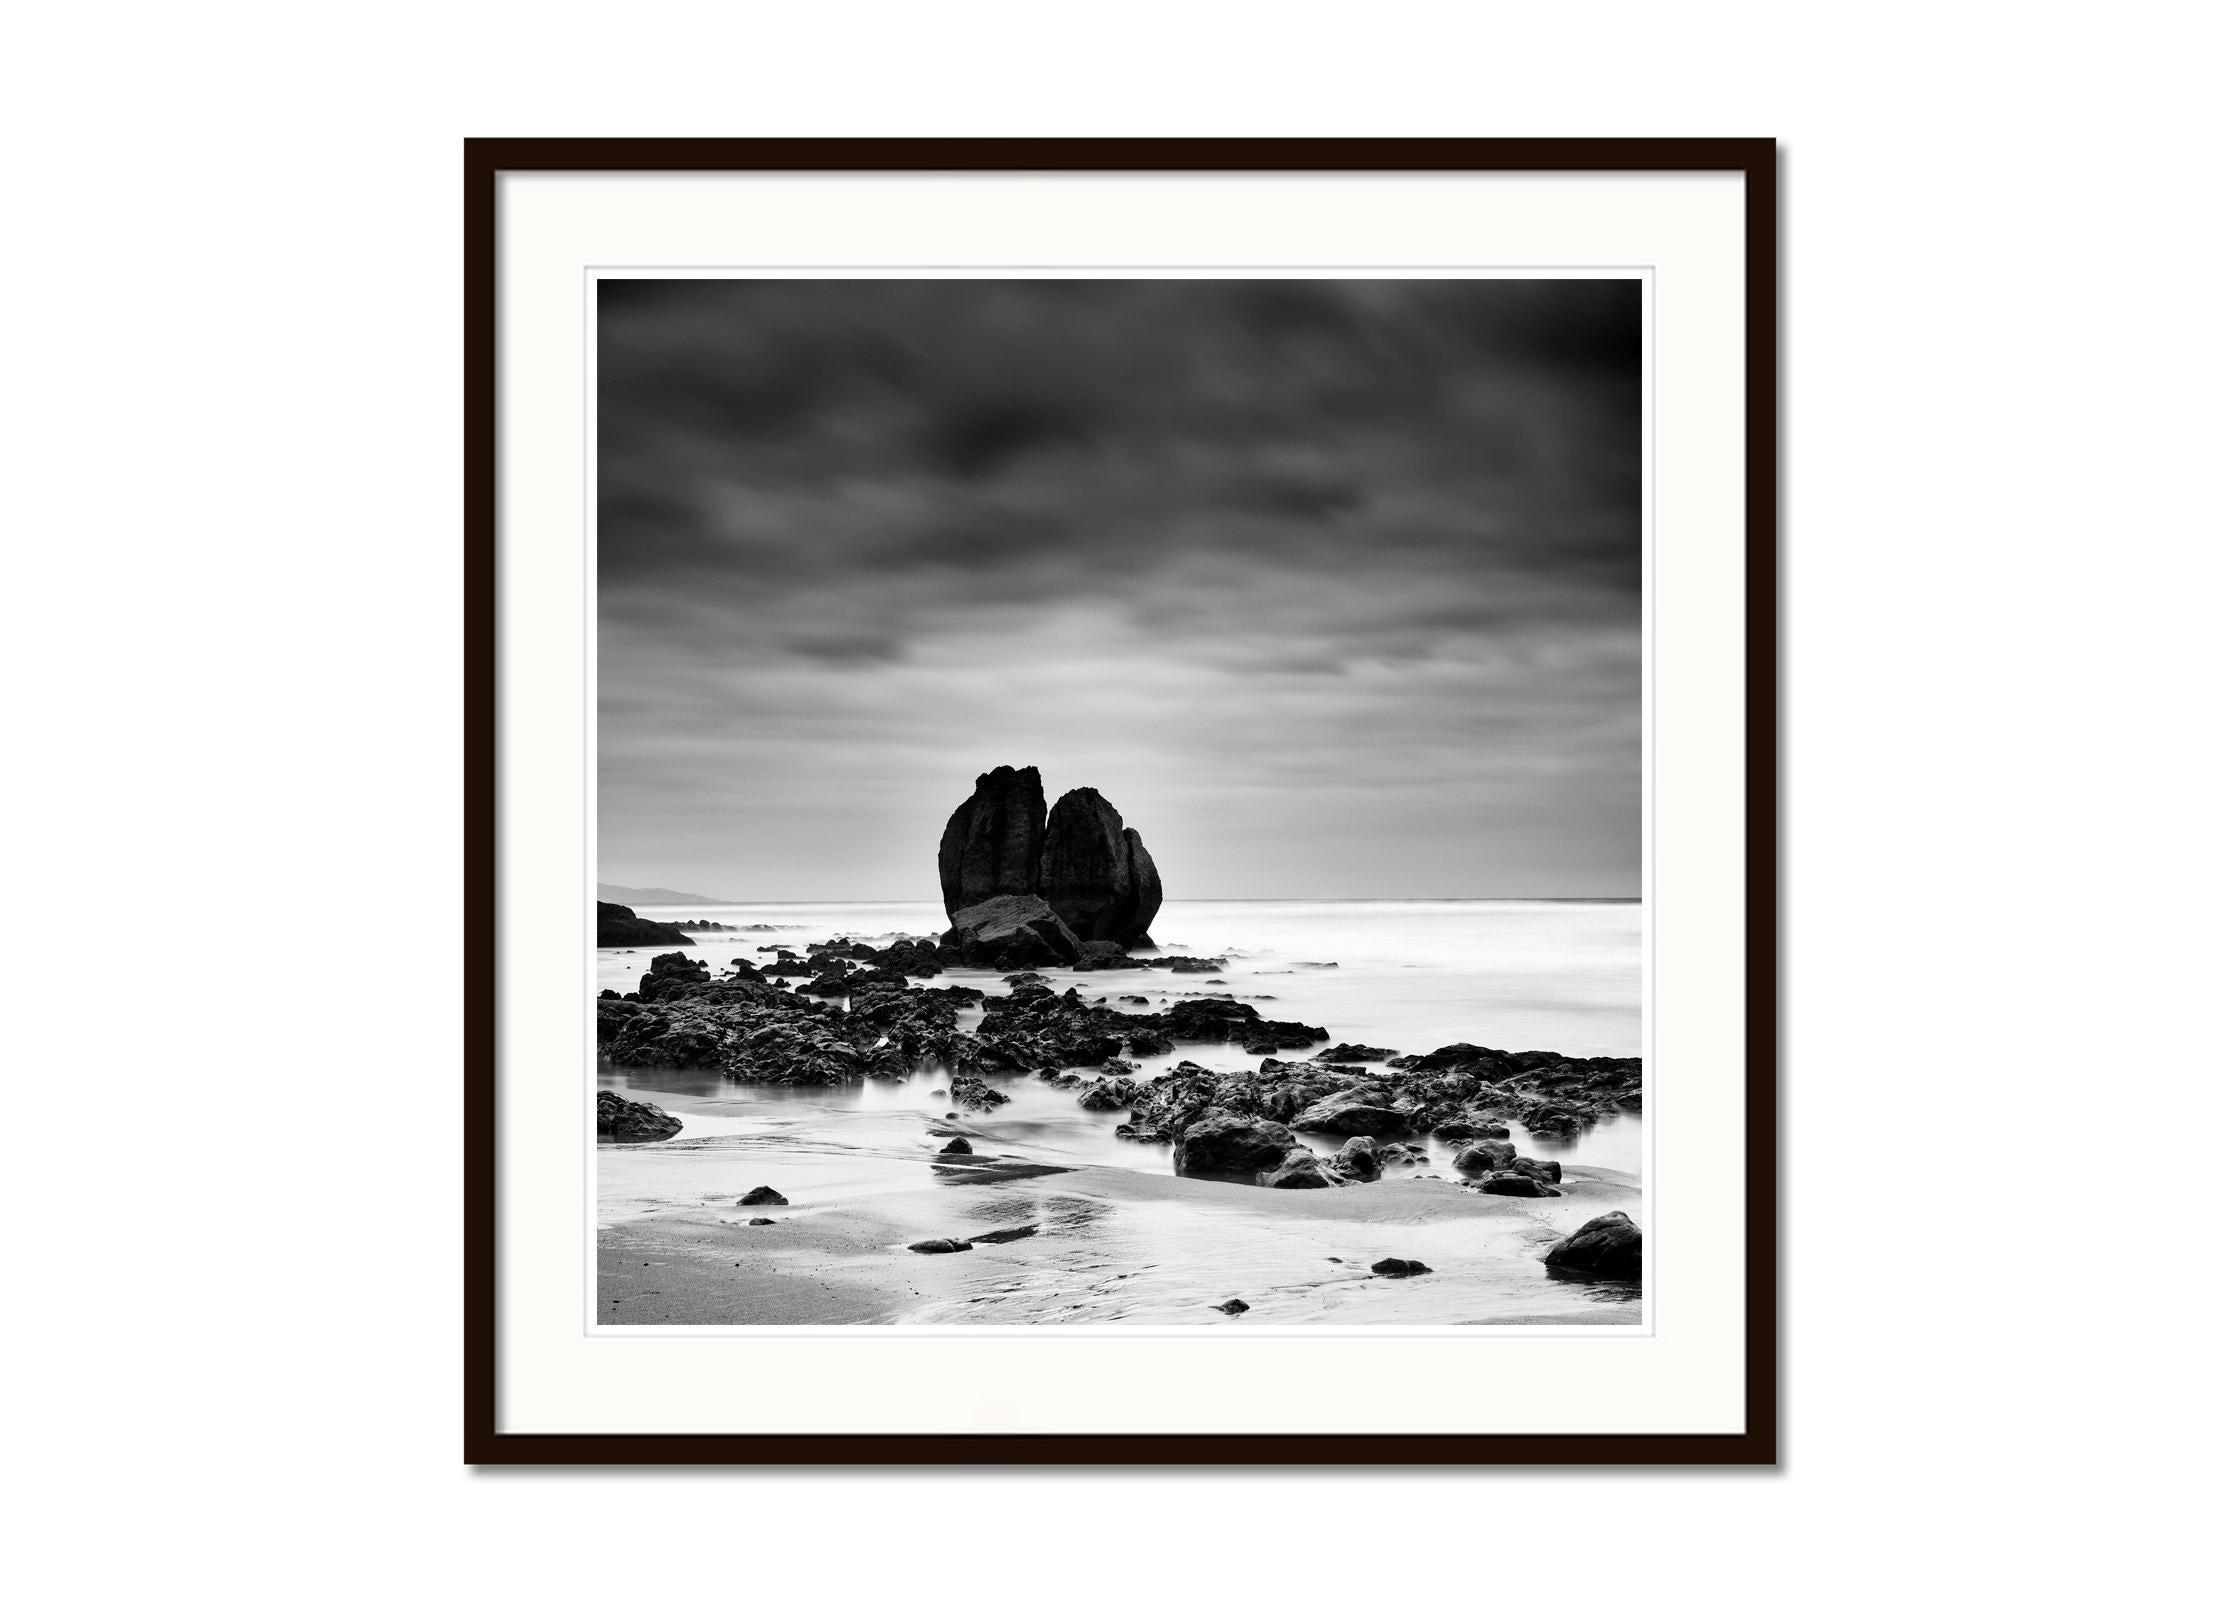 Rocks on the Shore, sandy beach, black and white fine art photography, landscape - Gray Black and White Photograph by Gerald Berghammer